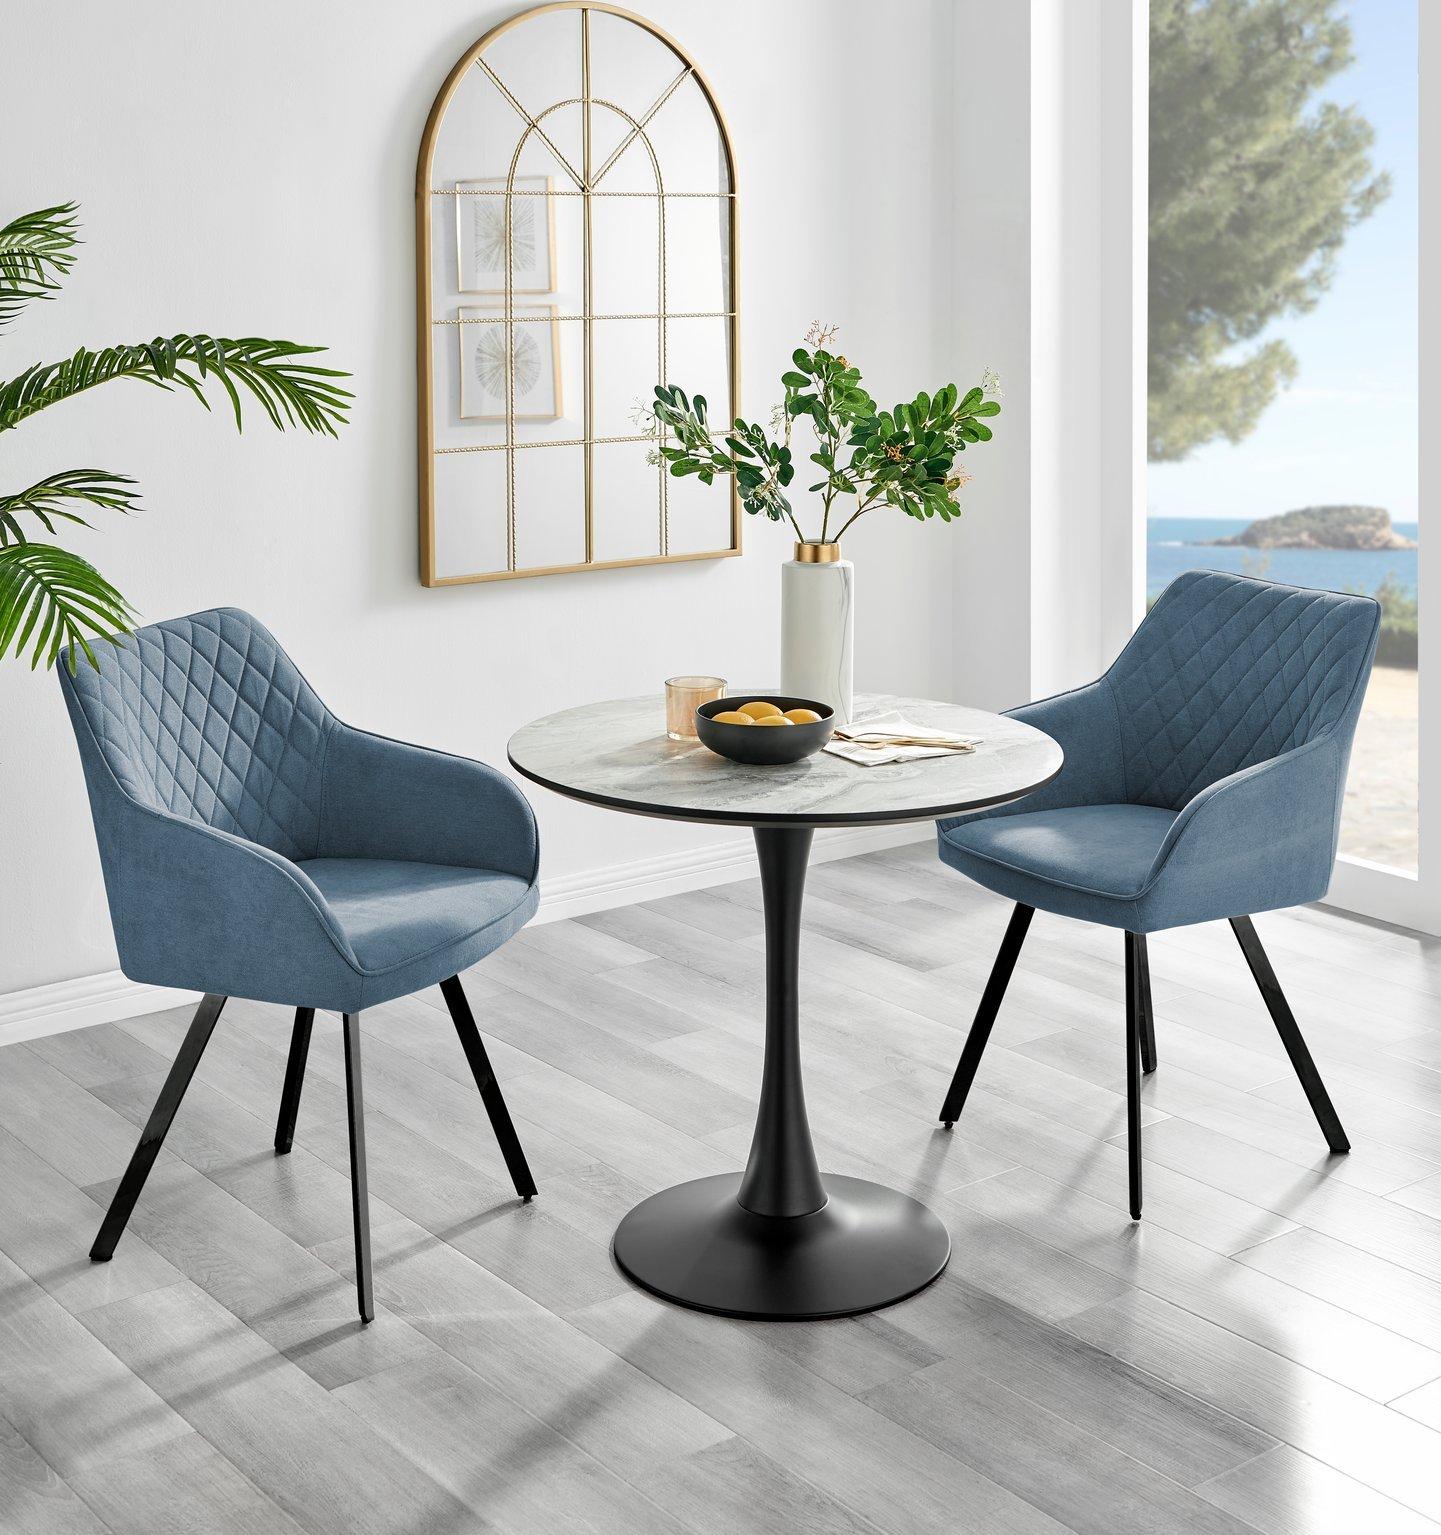 Elina White Marble Effect Scratch Resistant Dining Table & 2 Falun Black Leg Fabric Chairs